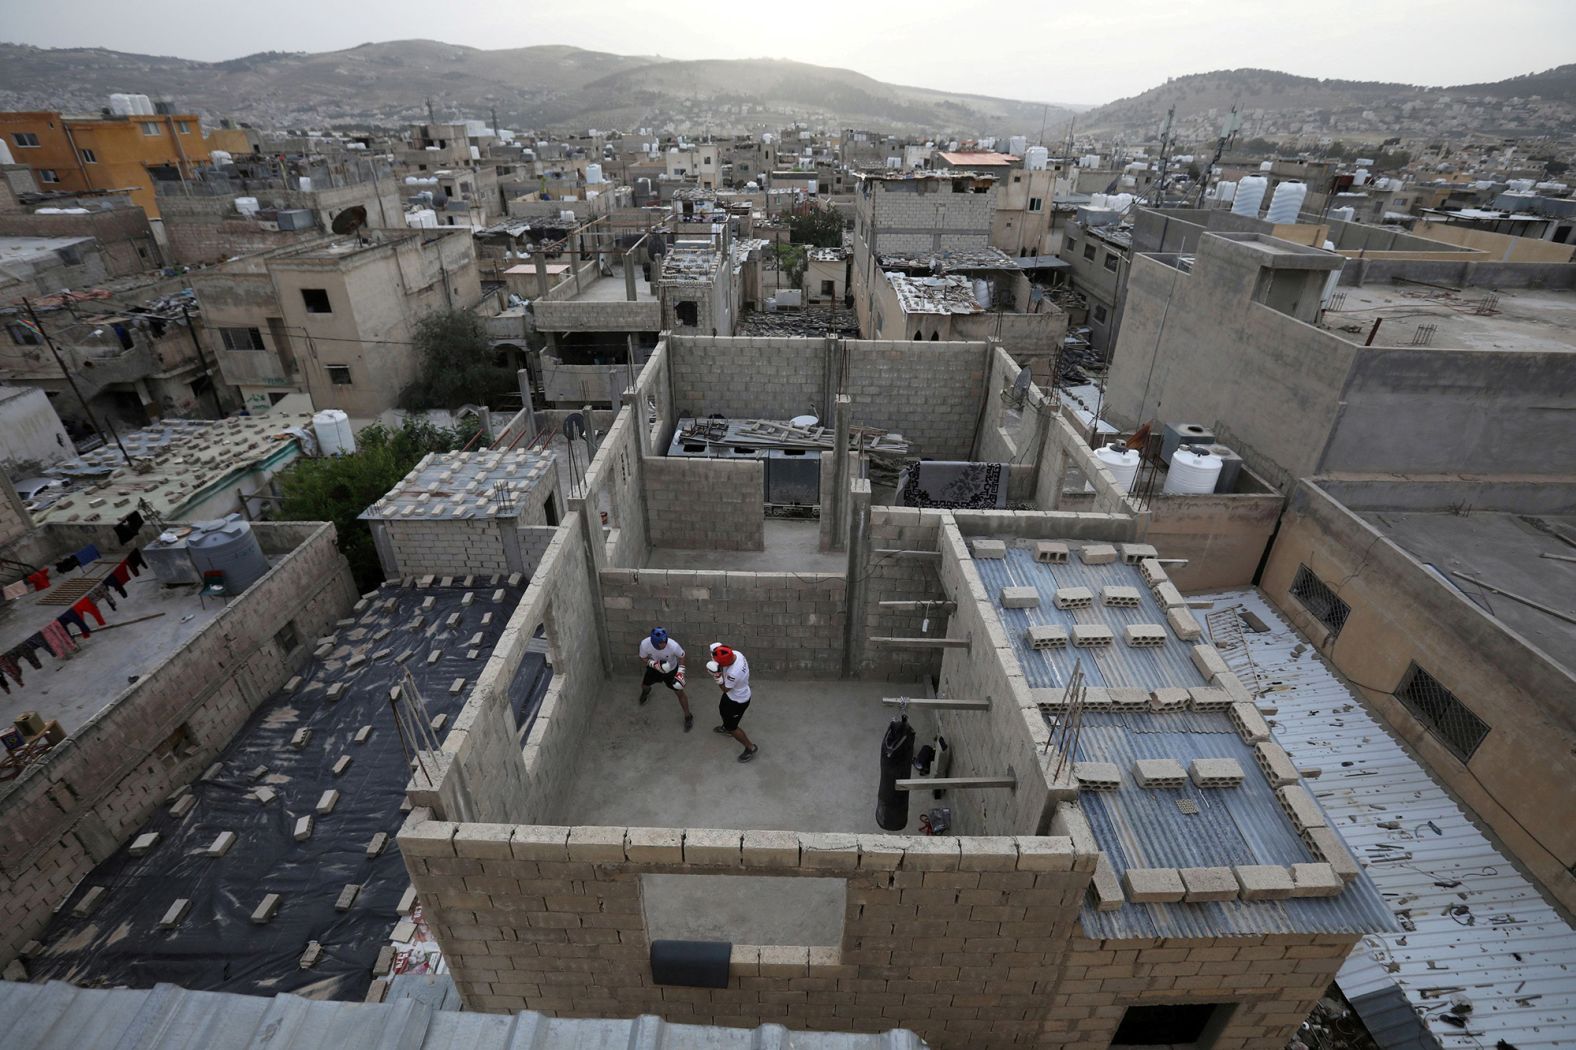 Boxers Hussein and Zeyad Ashish train on the roof of their home in the Al-Baqa'a refugee camp near Amman, Jordan, on May 14. The brothers have qualified for the Tokyo Olympics. <a href="http://www.cnn.com/2020/05/14/world/gallery/athletes-train-during-lockdown/index.html" target="_blank">Related photos: Athletes, stuck at home, are finding creative ways to train</a>